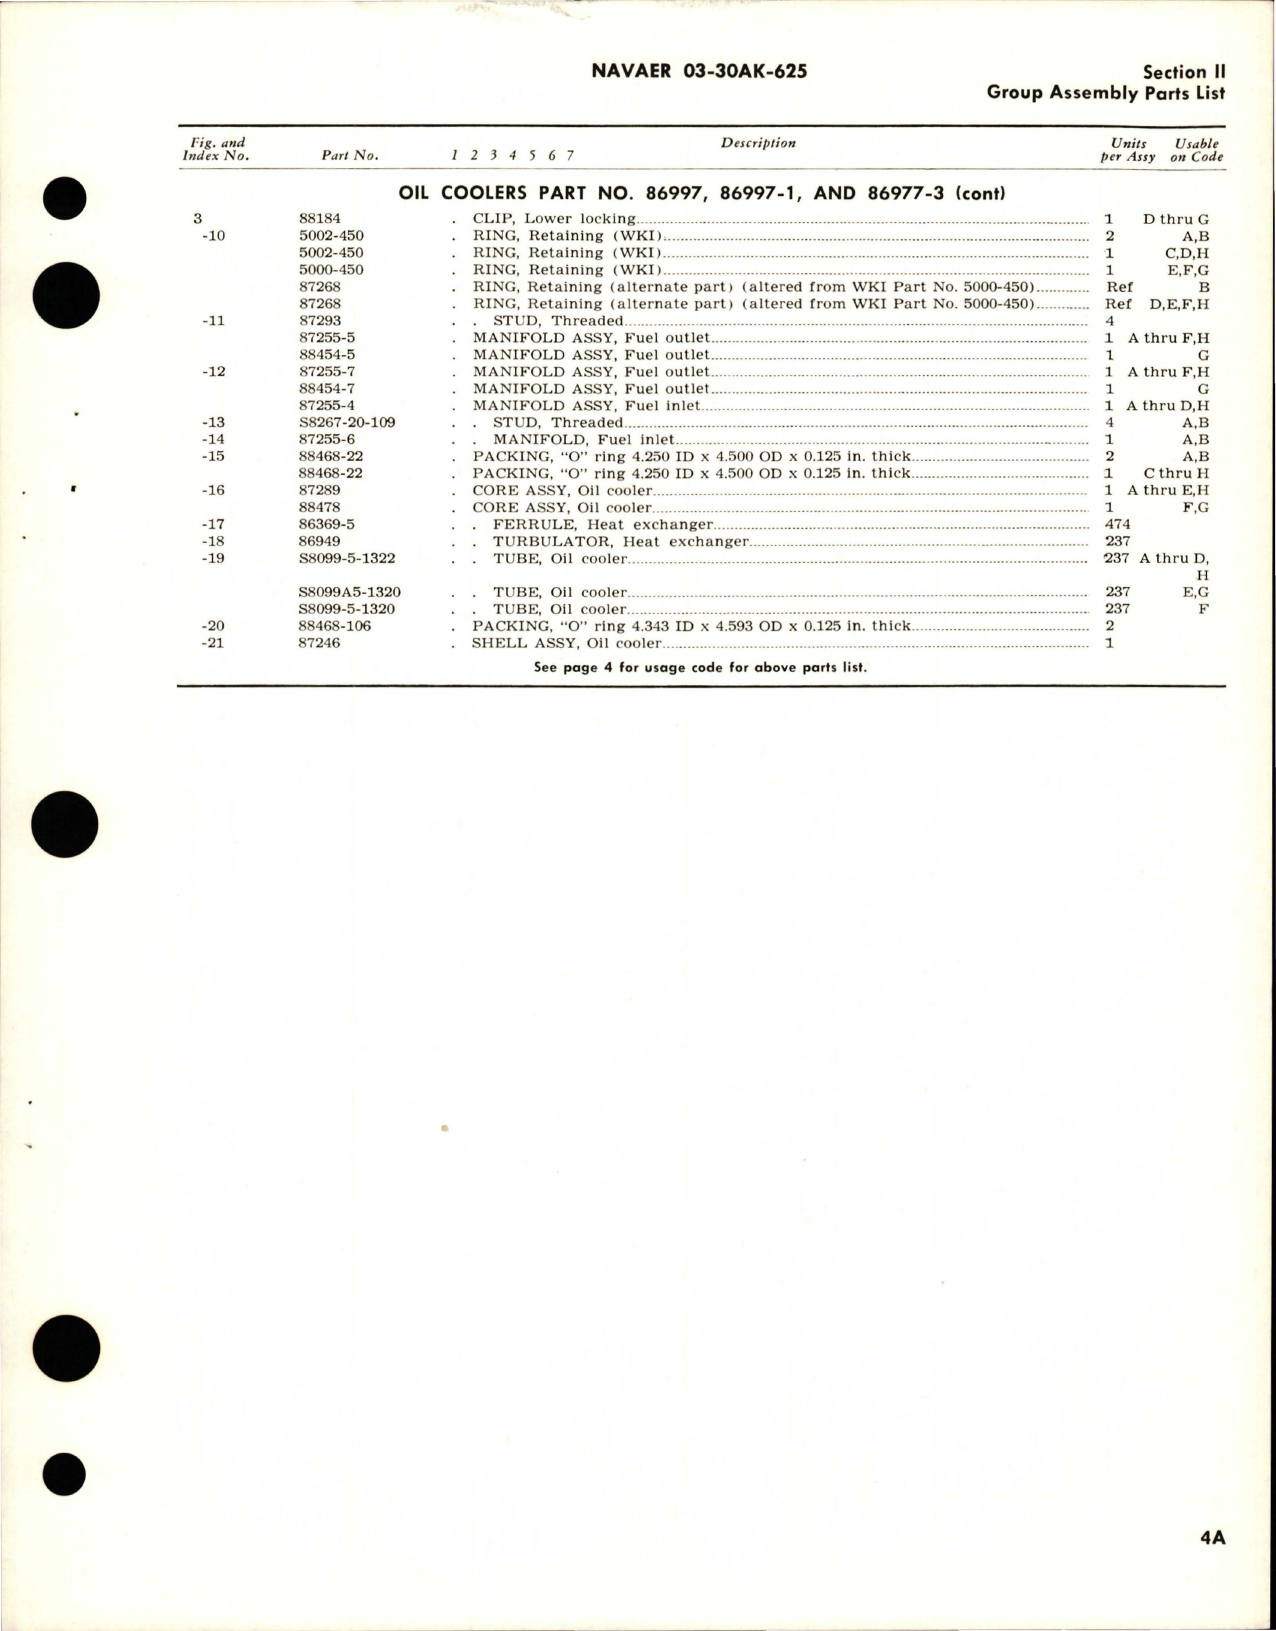 Sample page 7 from AirCorps Library document: Illustrated Parts Breakdown for Oil Coolers, Heat Exchanger and Fuel Heater - Parts 86787 and 87889